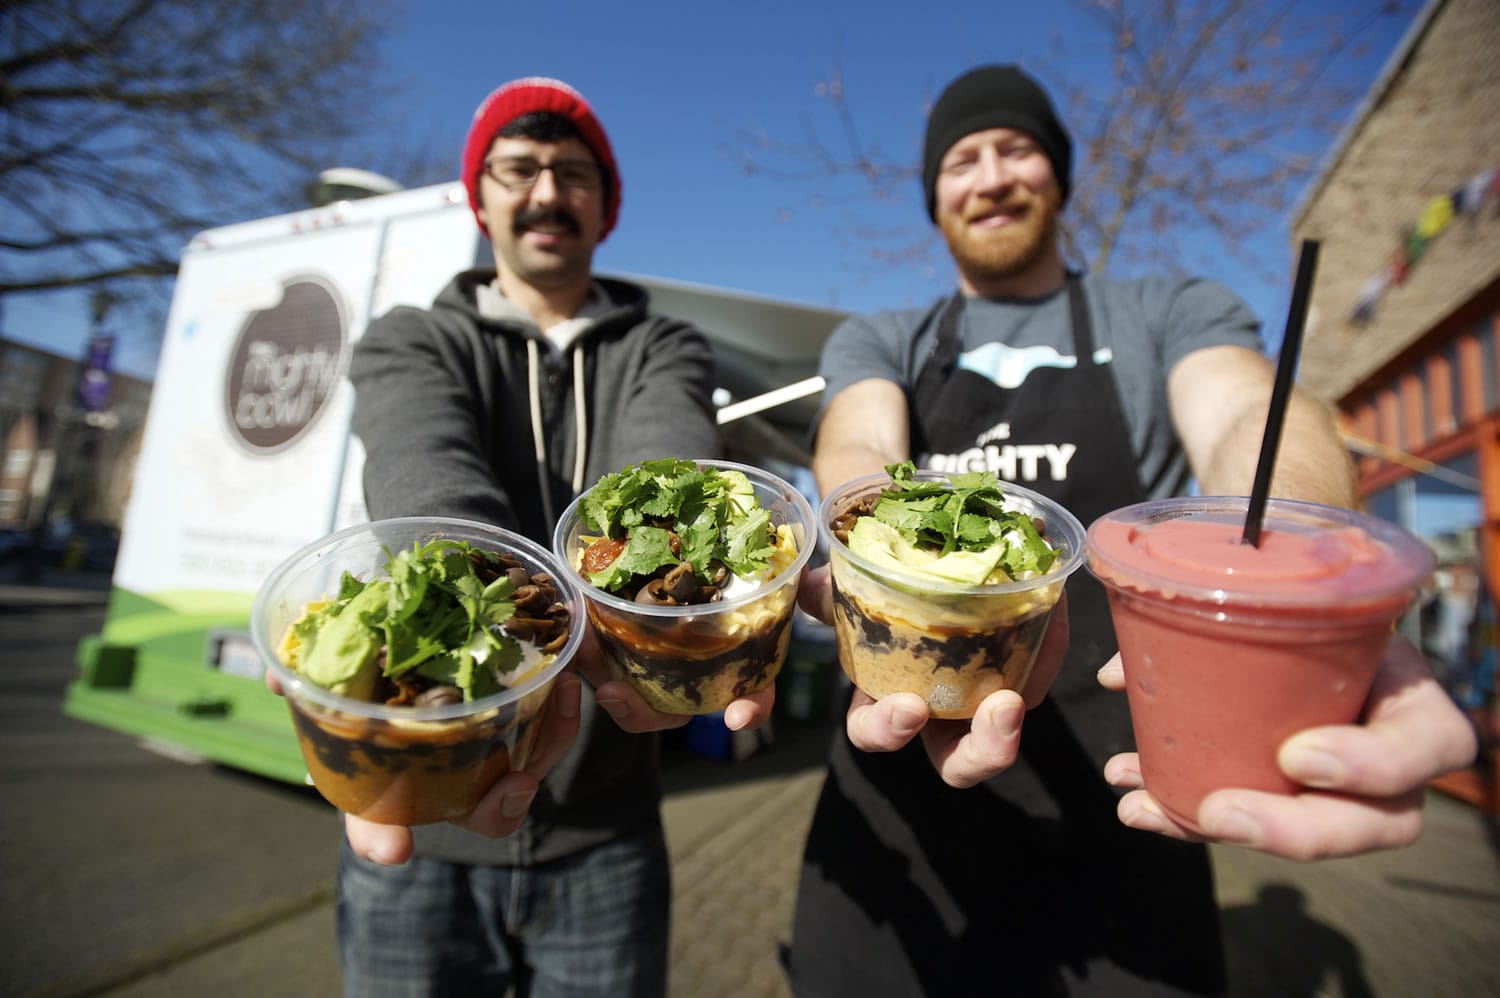 Steve Valenta, left, and Kevin DeGraw show off the Kiggins Bowl, from left, the Mighty Bowl, the Peanut Bowl and the Carter Park smoothie outside their mobile food truck.